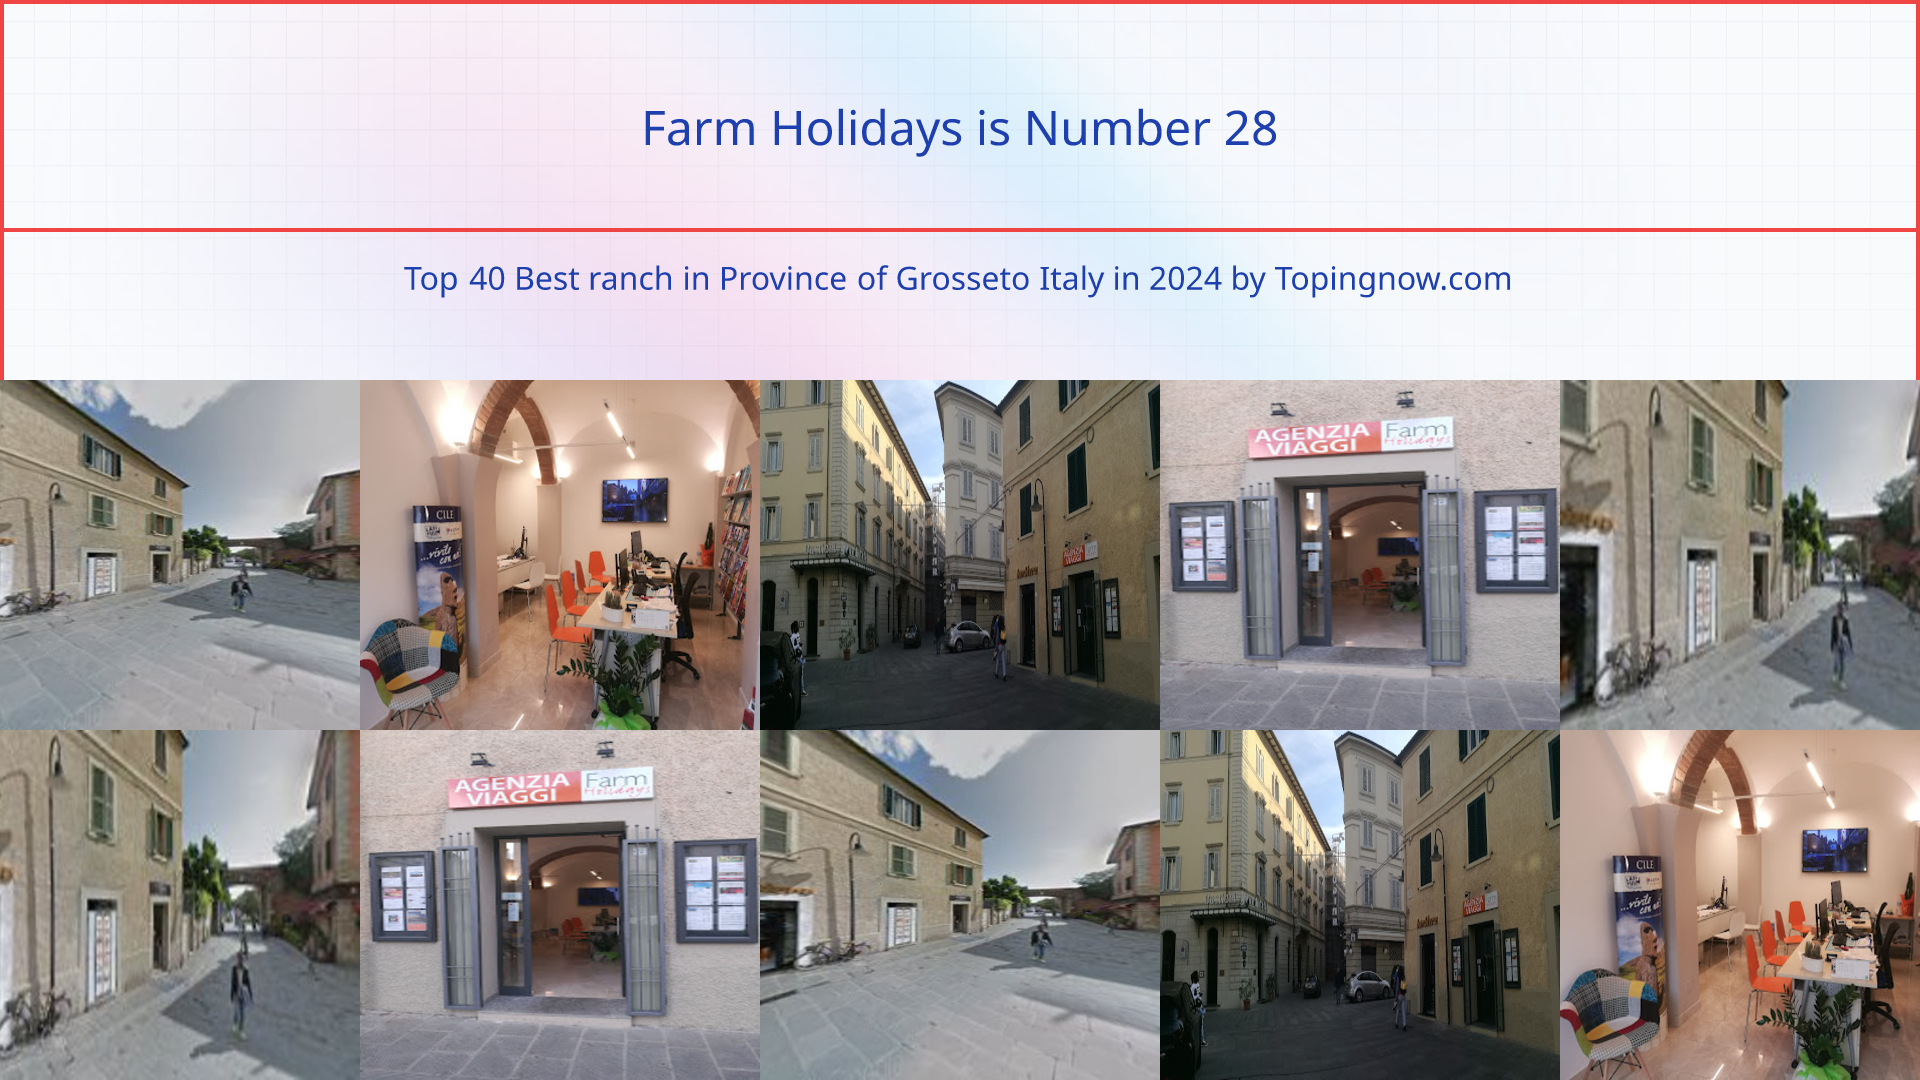 Farm Holidays: Top 40 Best ranch in Province of Grosseto Italy in 2024